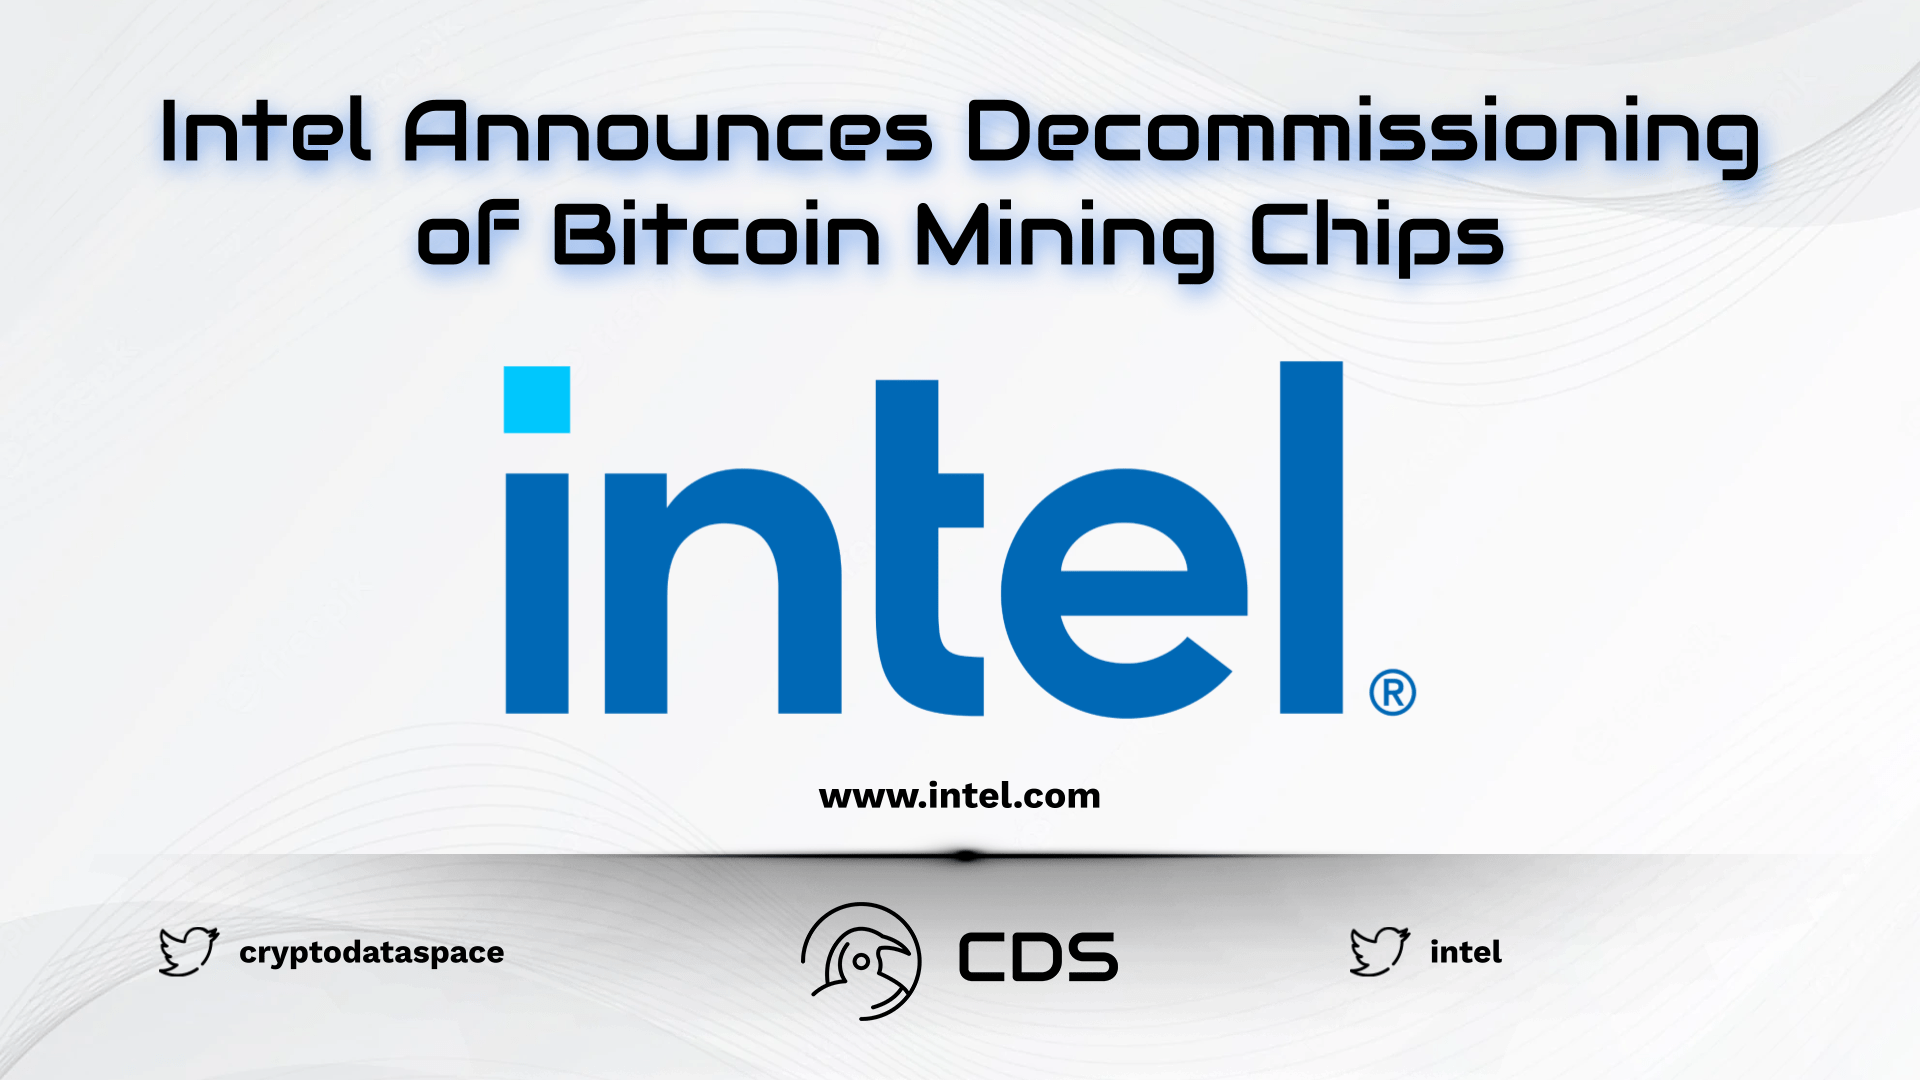 Intel Announces Decommissioning of Bitcoin Mining Chips